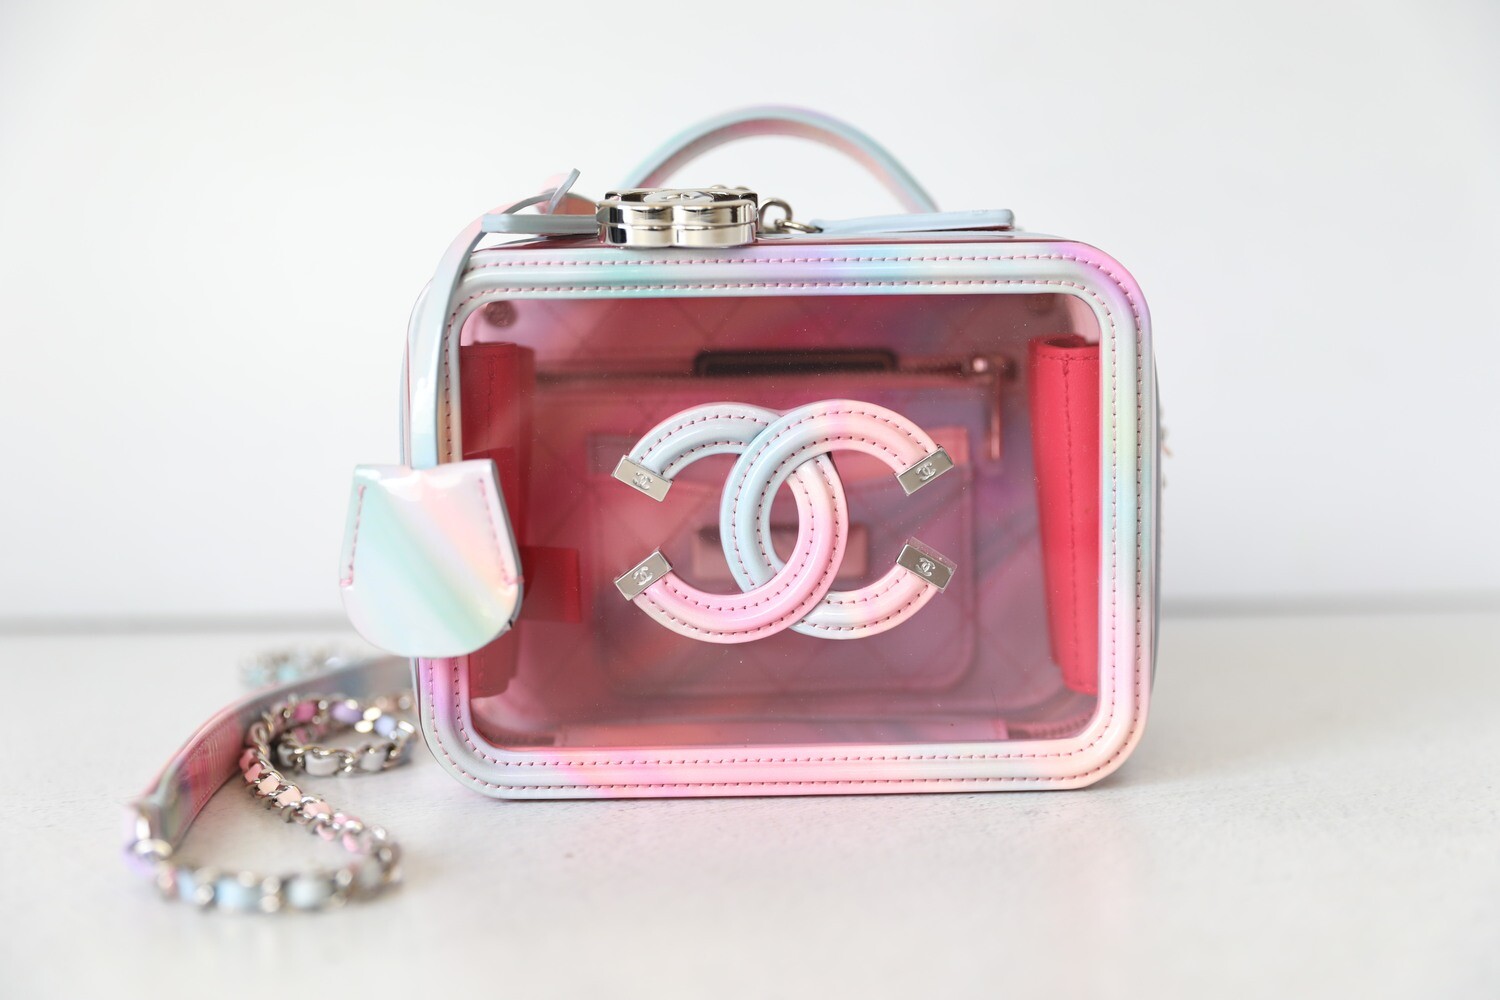 Chanel Filigree Vanity Small, Pastel PVC, Preowned in Dustbag